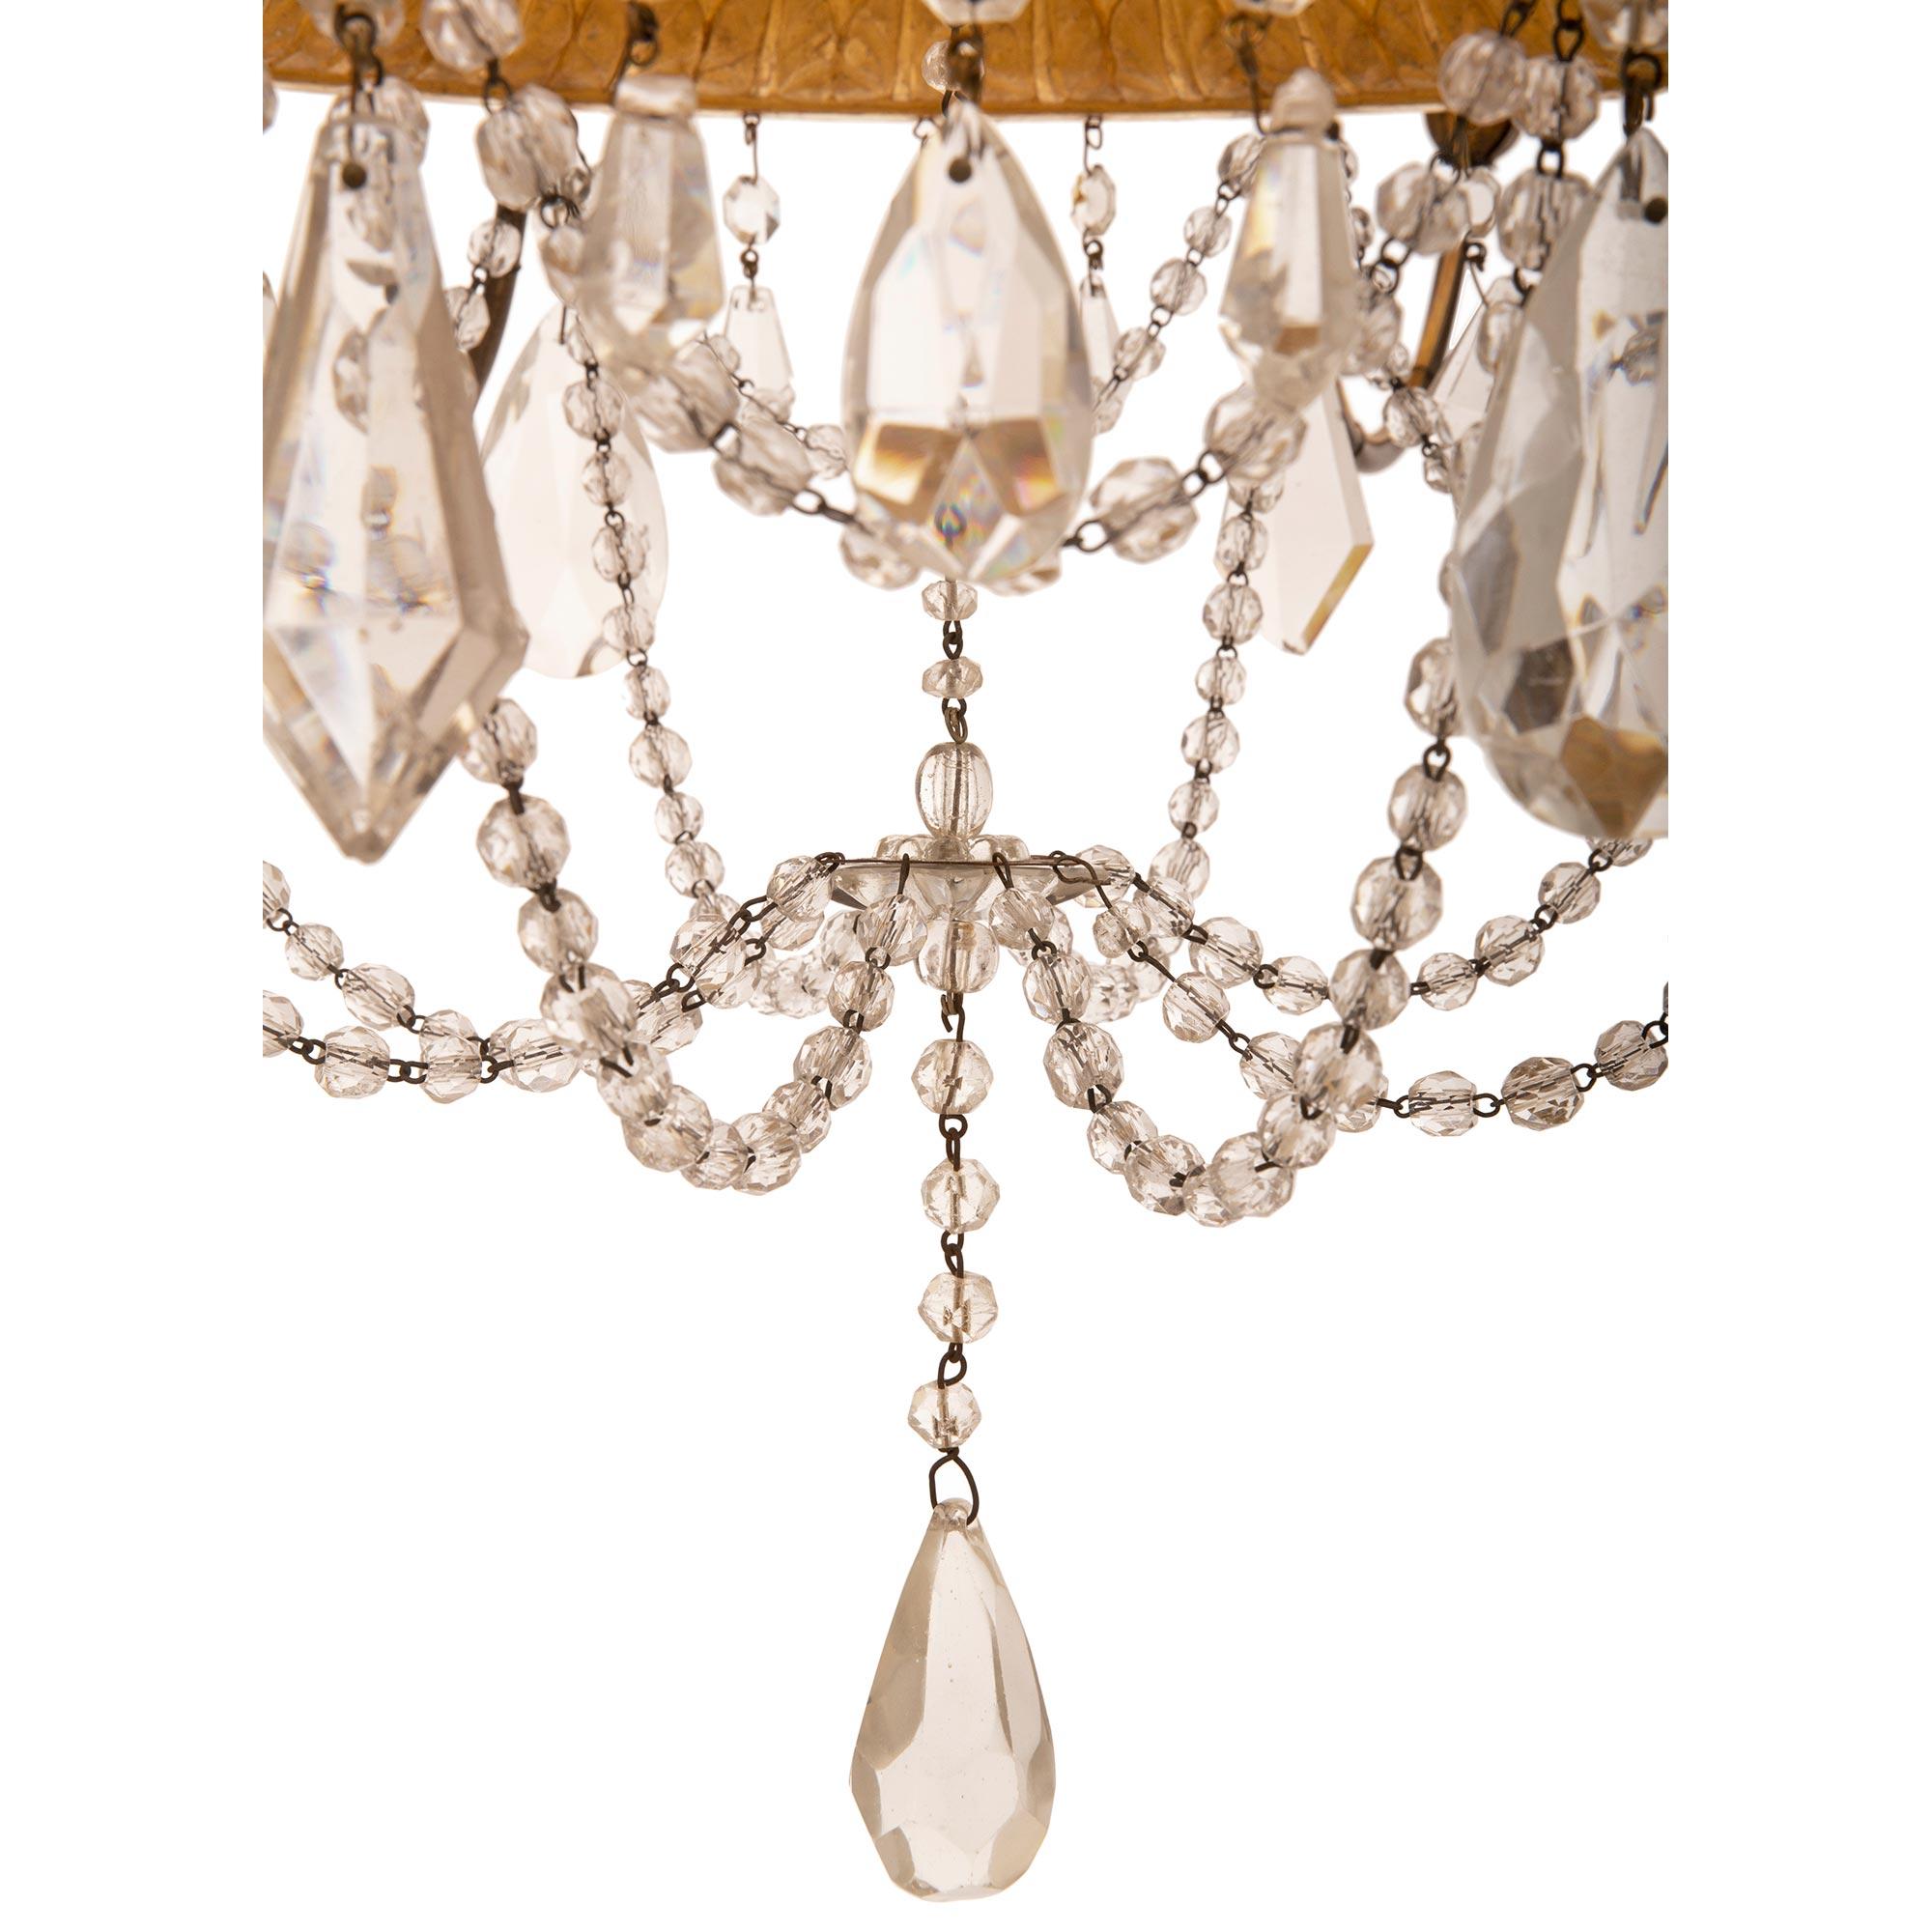 Pair of Italian 19th Century Crystal, Giltwood and Gilt Metal Chandeliers For Sale 4